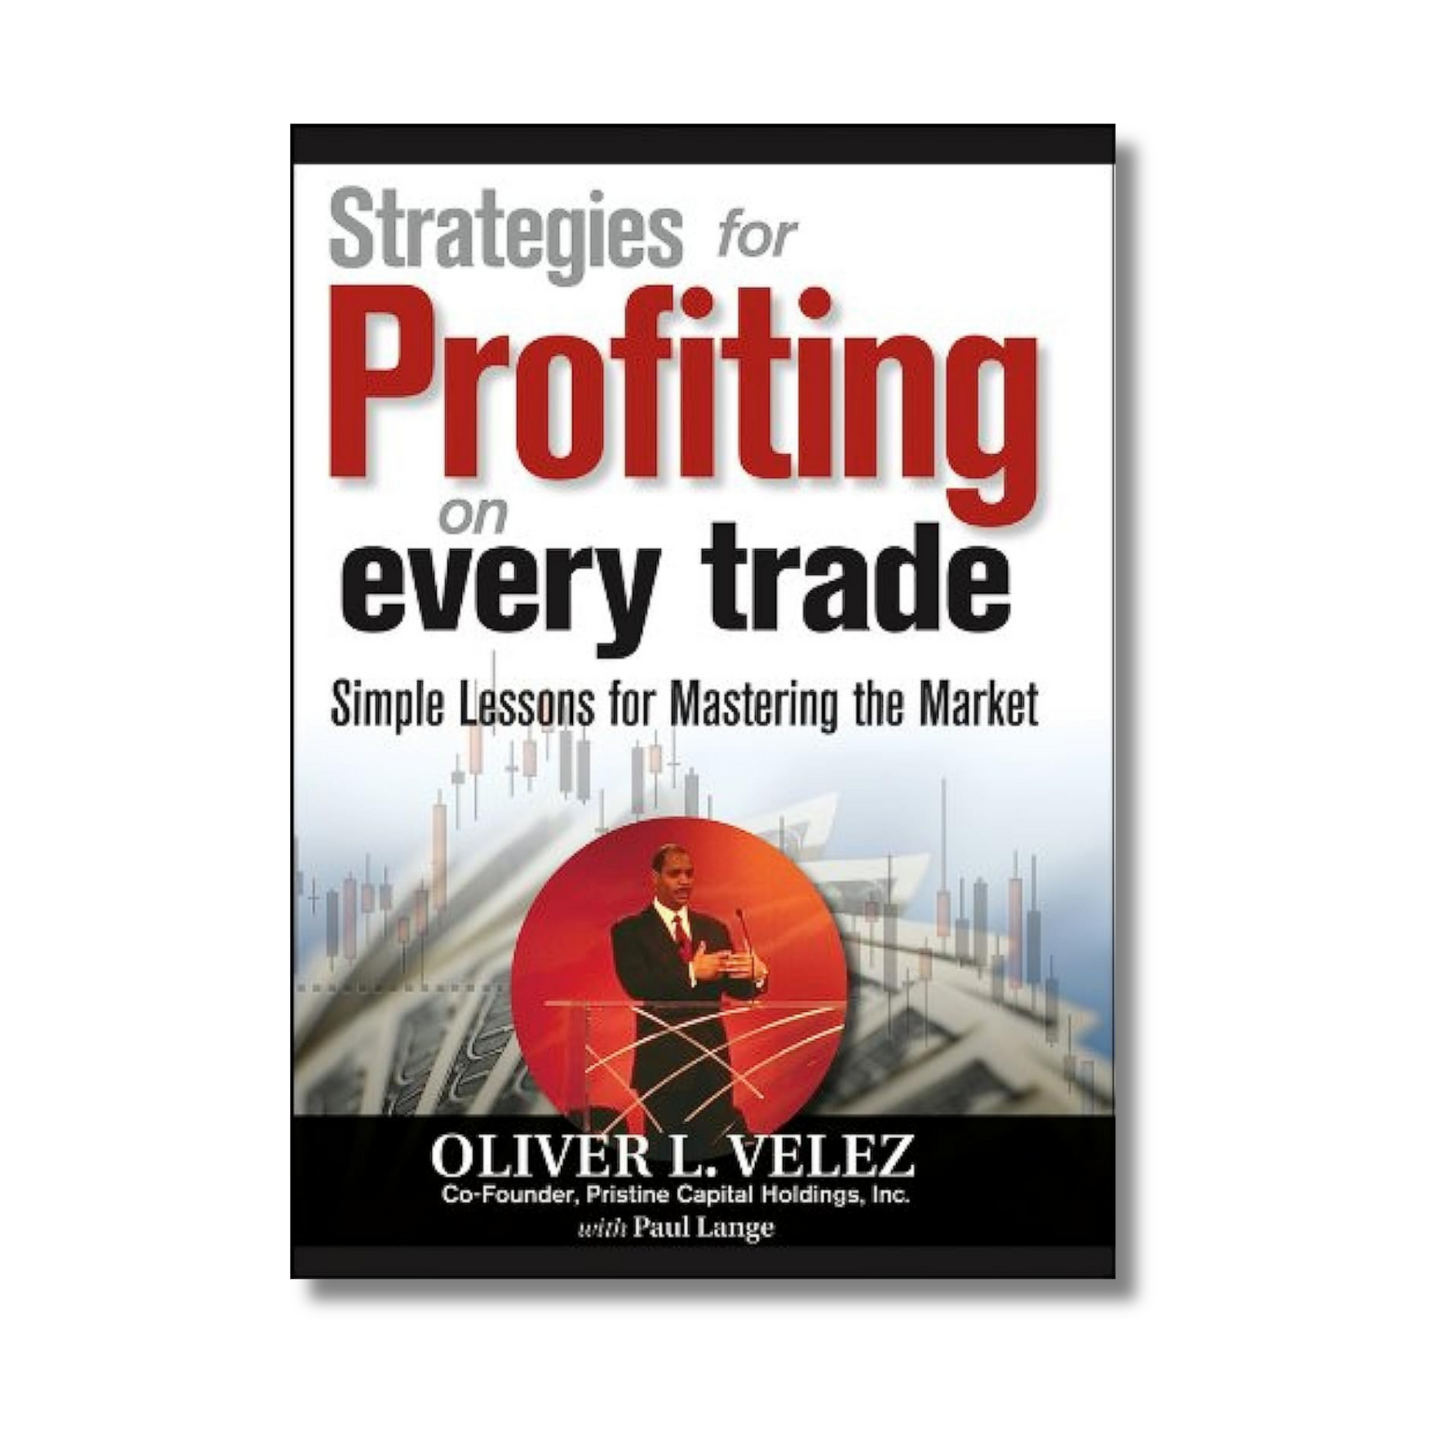 Strategies for Profiting on Every Trade By Oliver L. Velez (Hardcover)